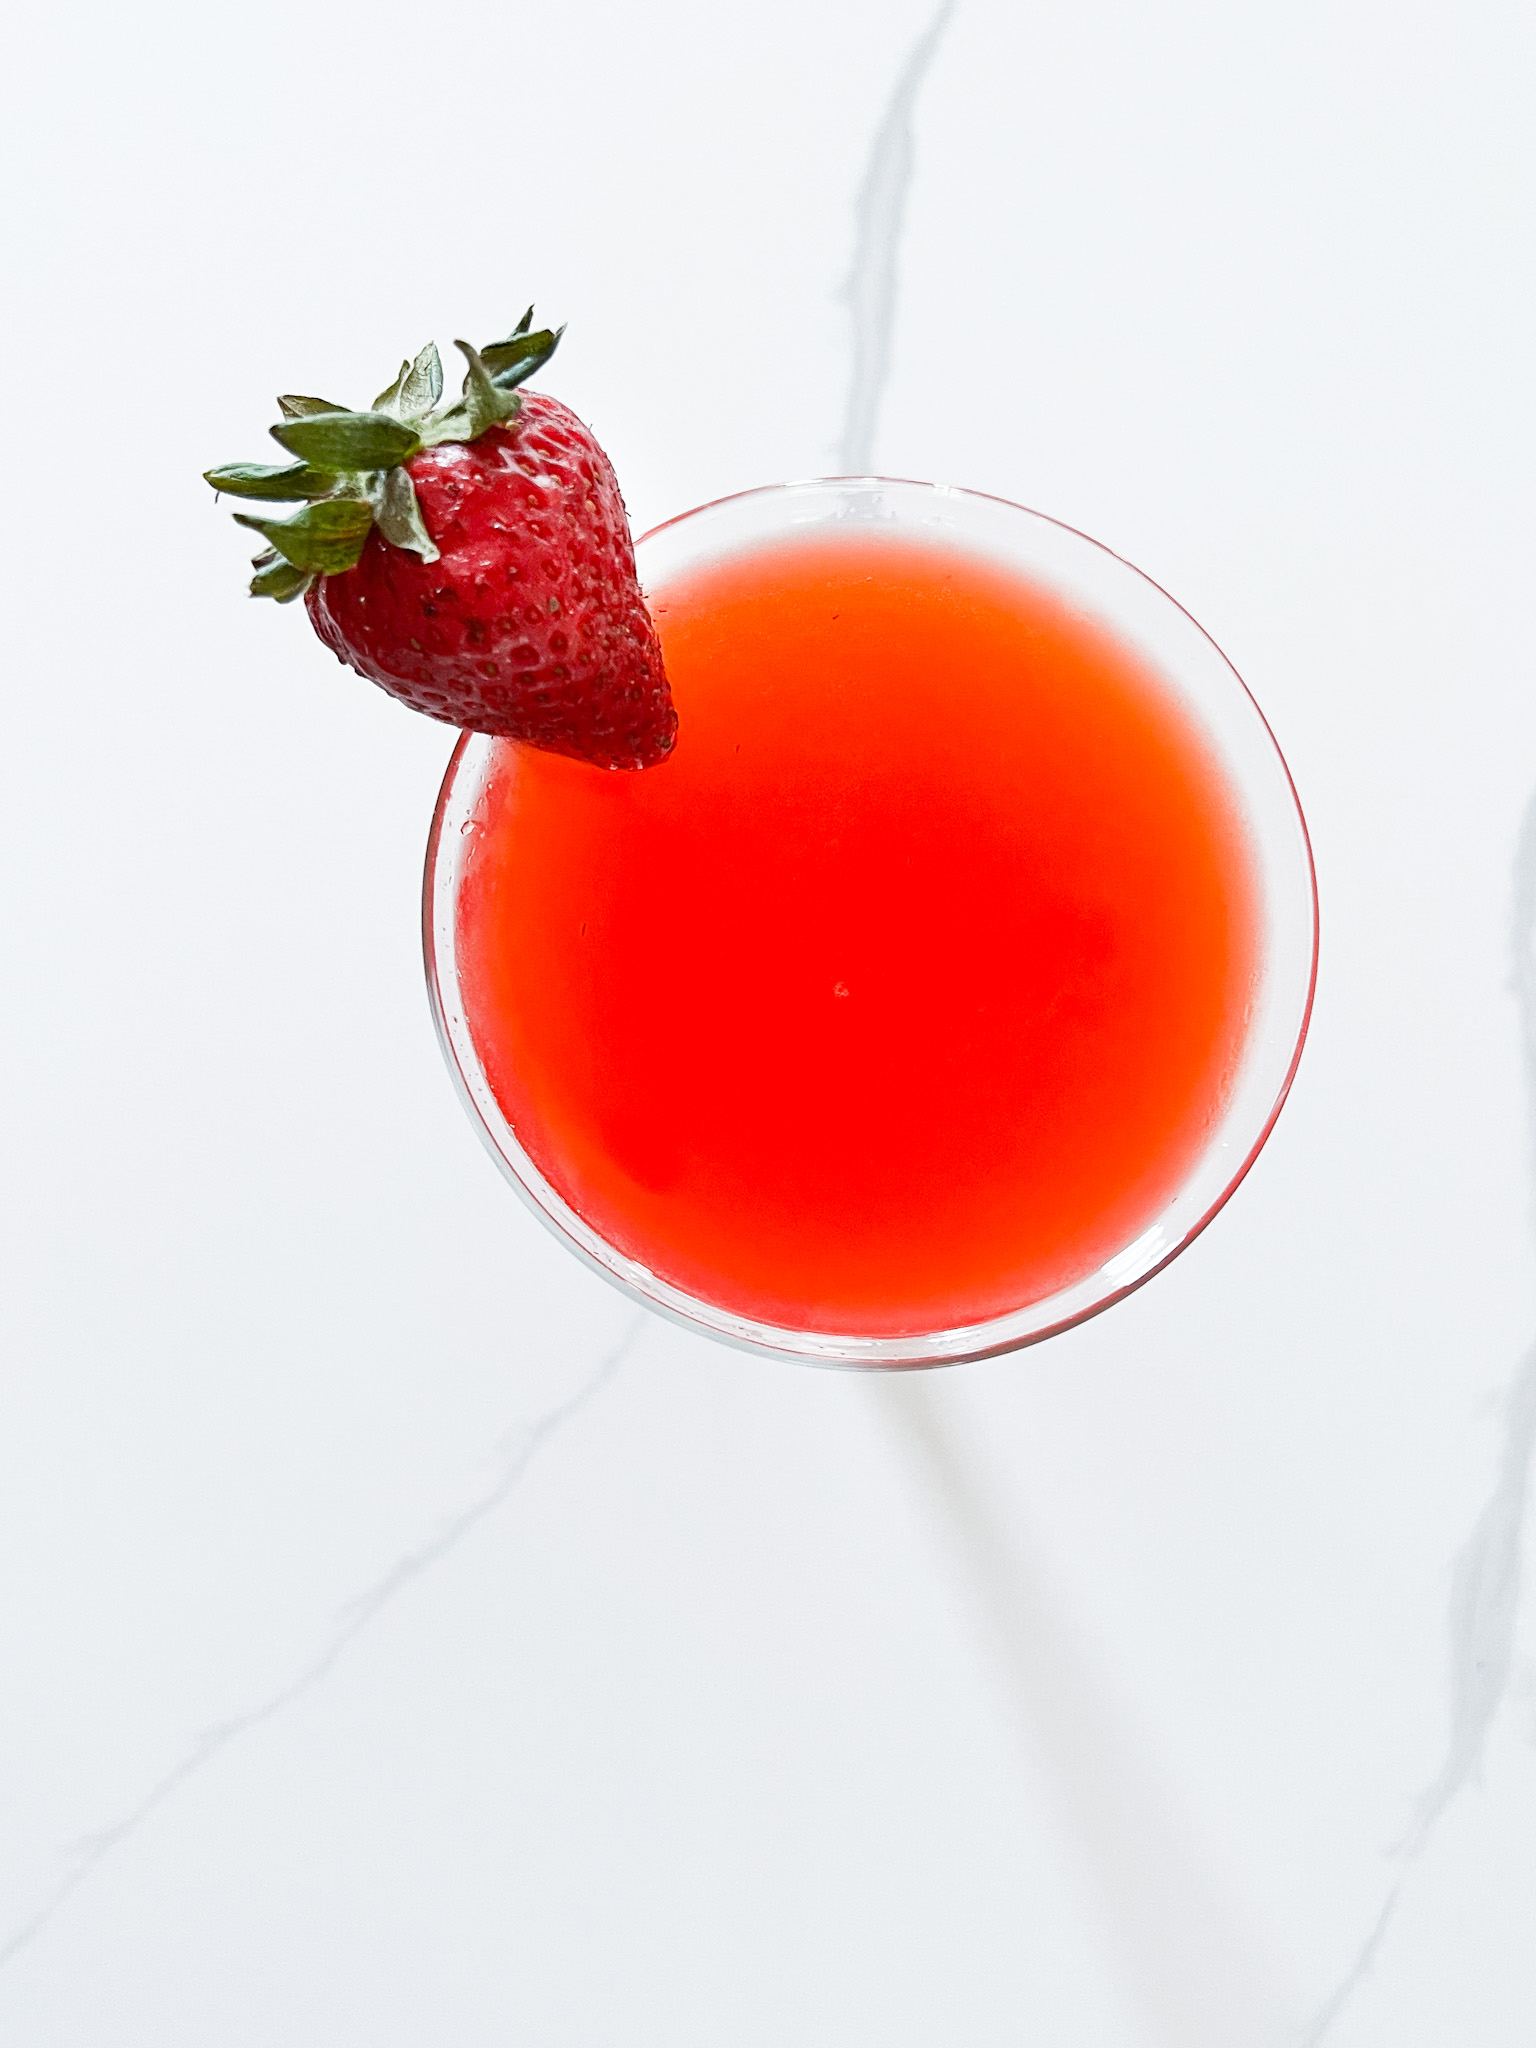 Daiquiri de fresa in a glass with a strawberry view from top down